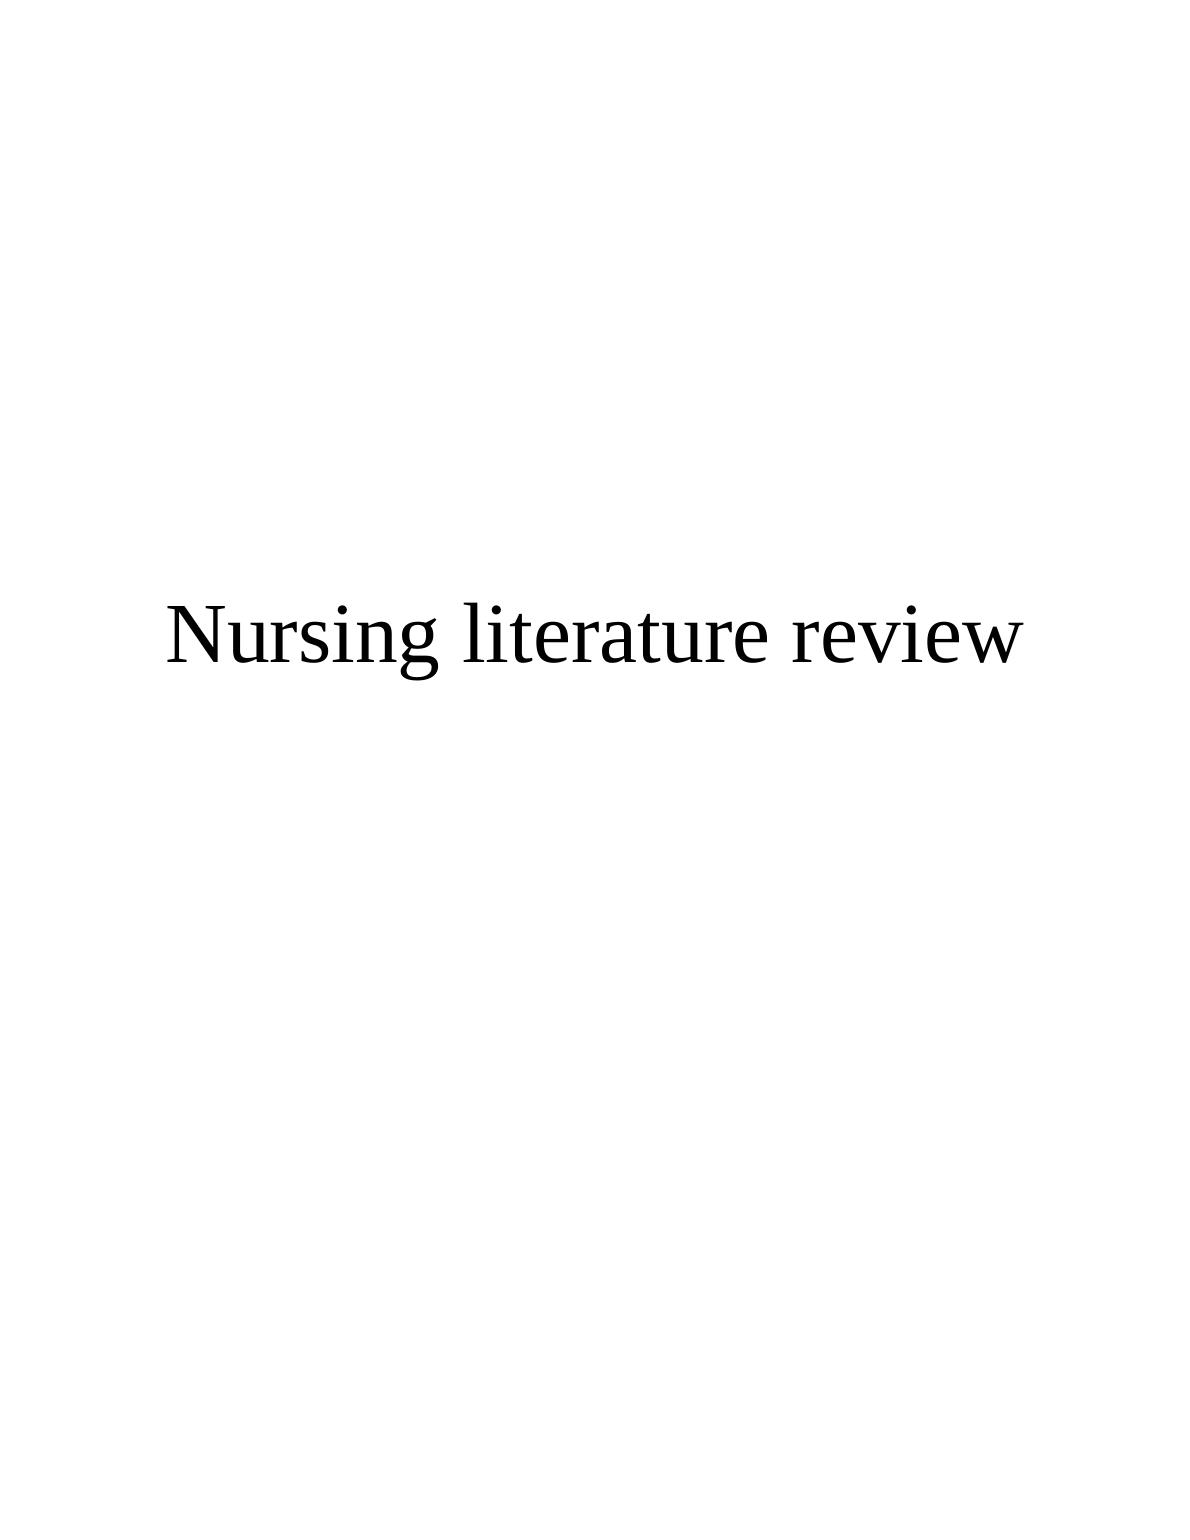 nursing literature review meaning